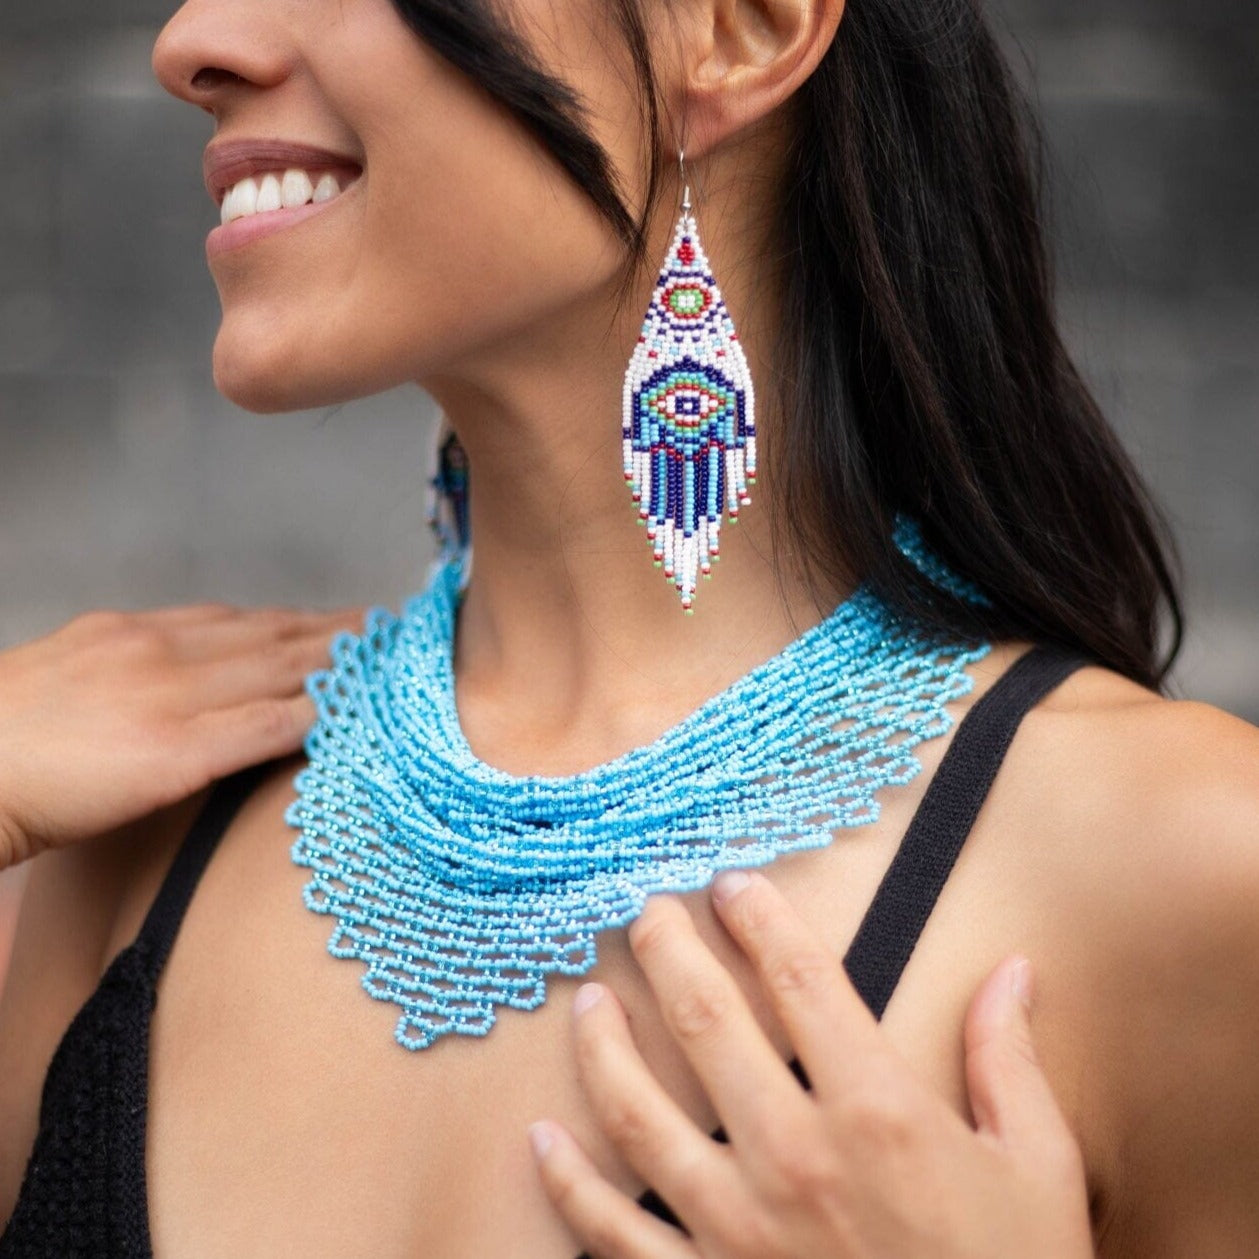 A woman wearing an Azore blue beaded scarf choker necklace, Native American jewelry, and blue Hamsa beaded earrings.